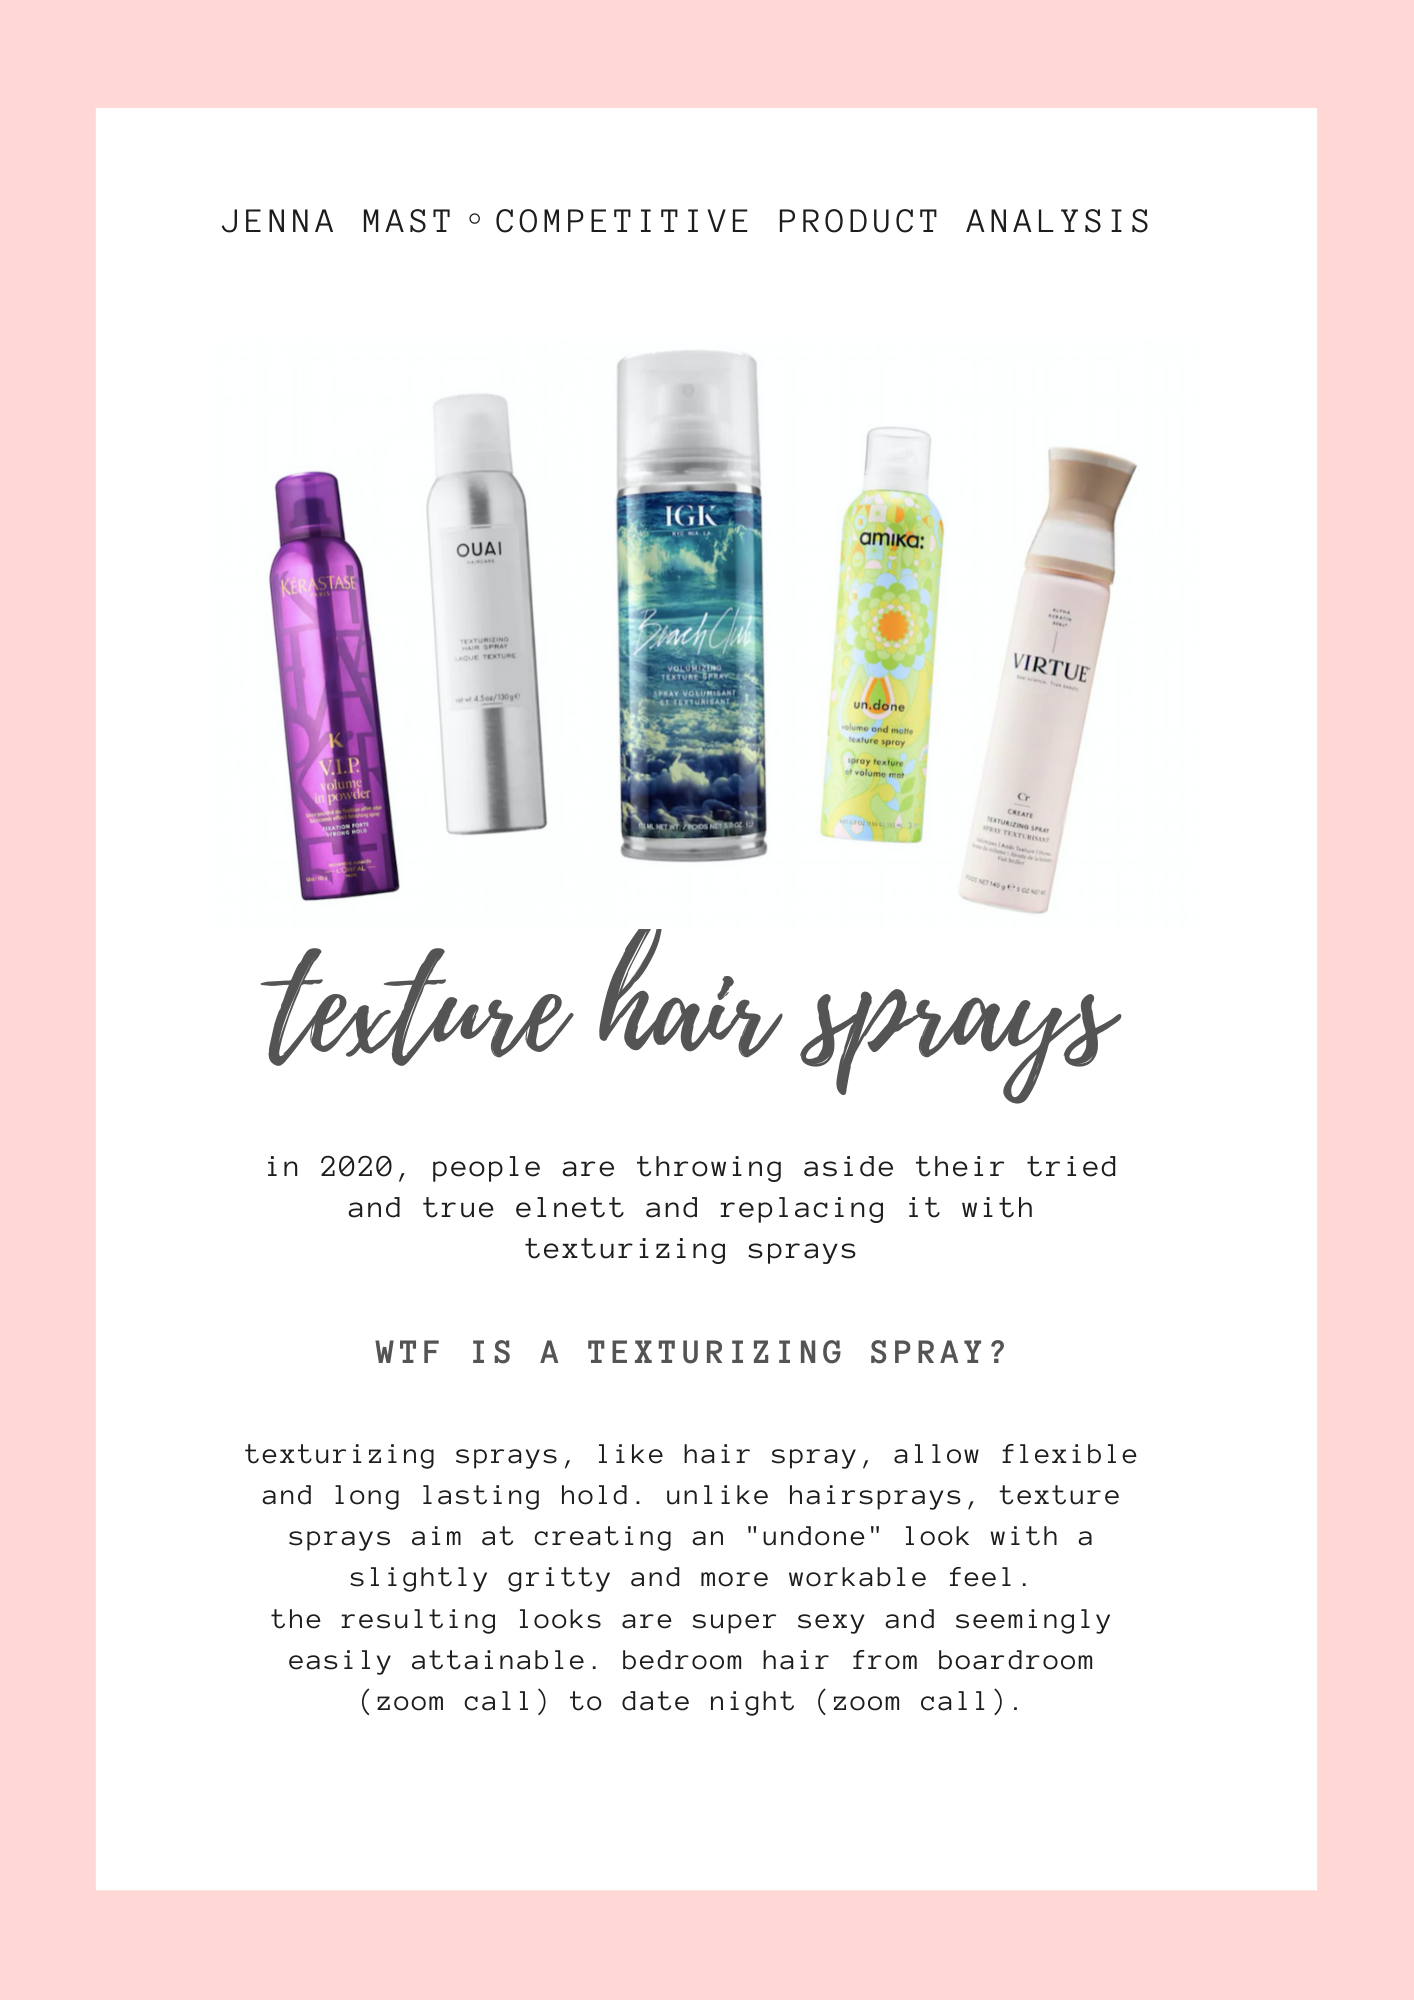 How to choose the right texture spray for hair — Jenna Mast